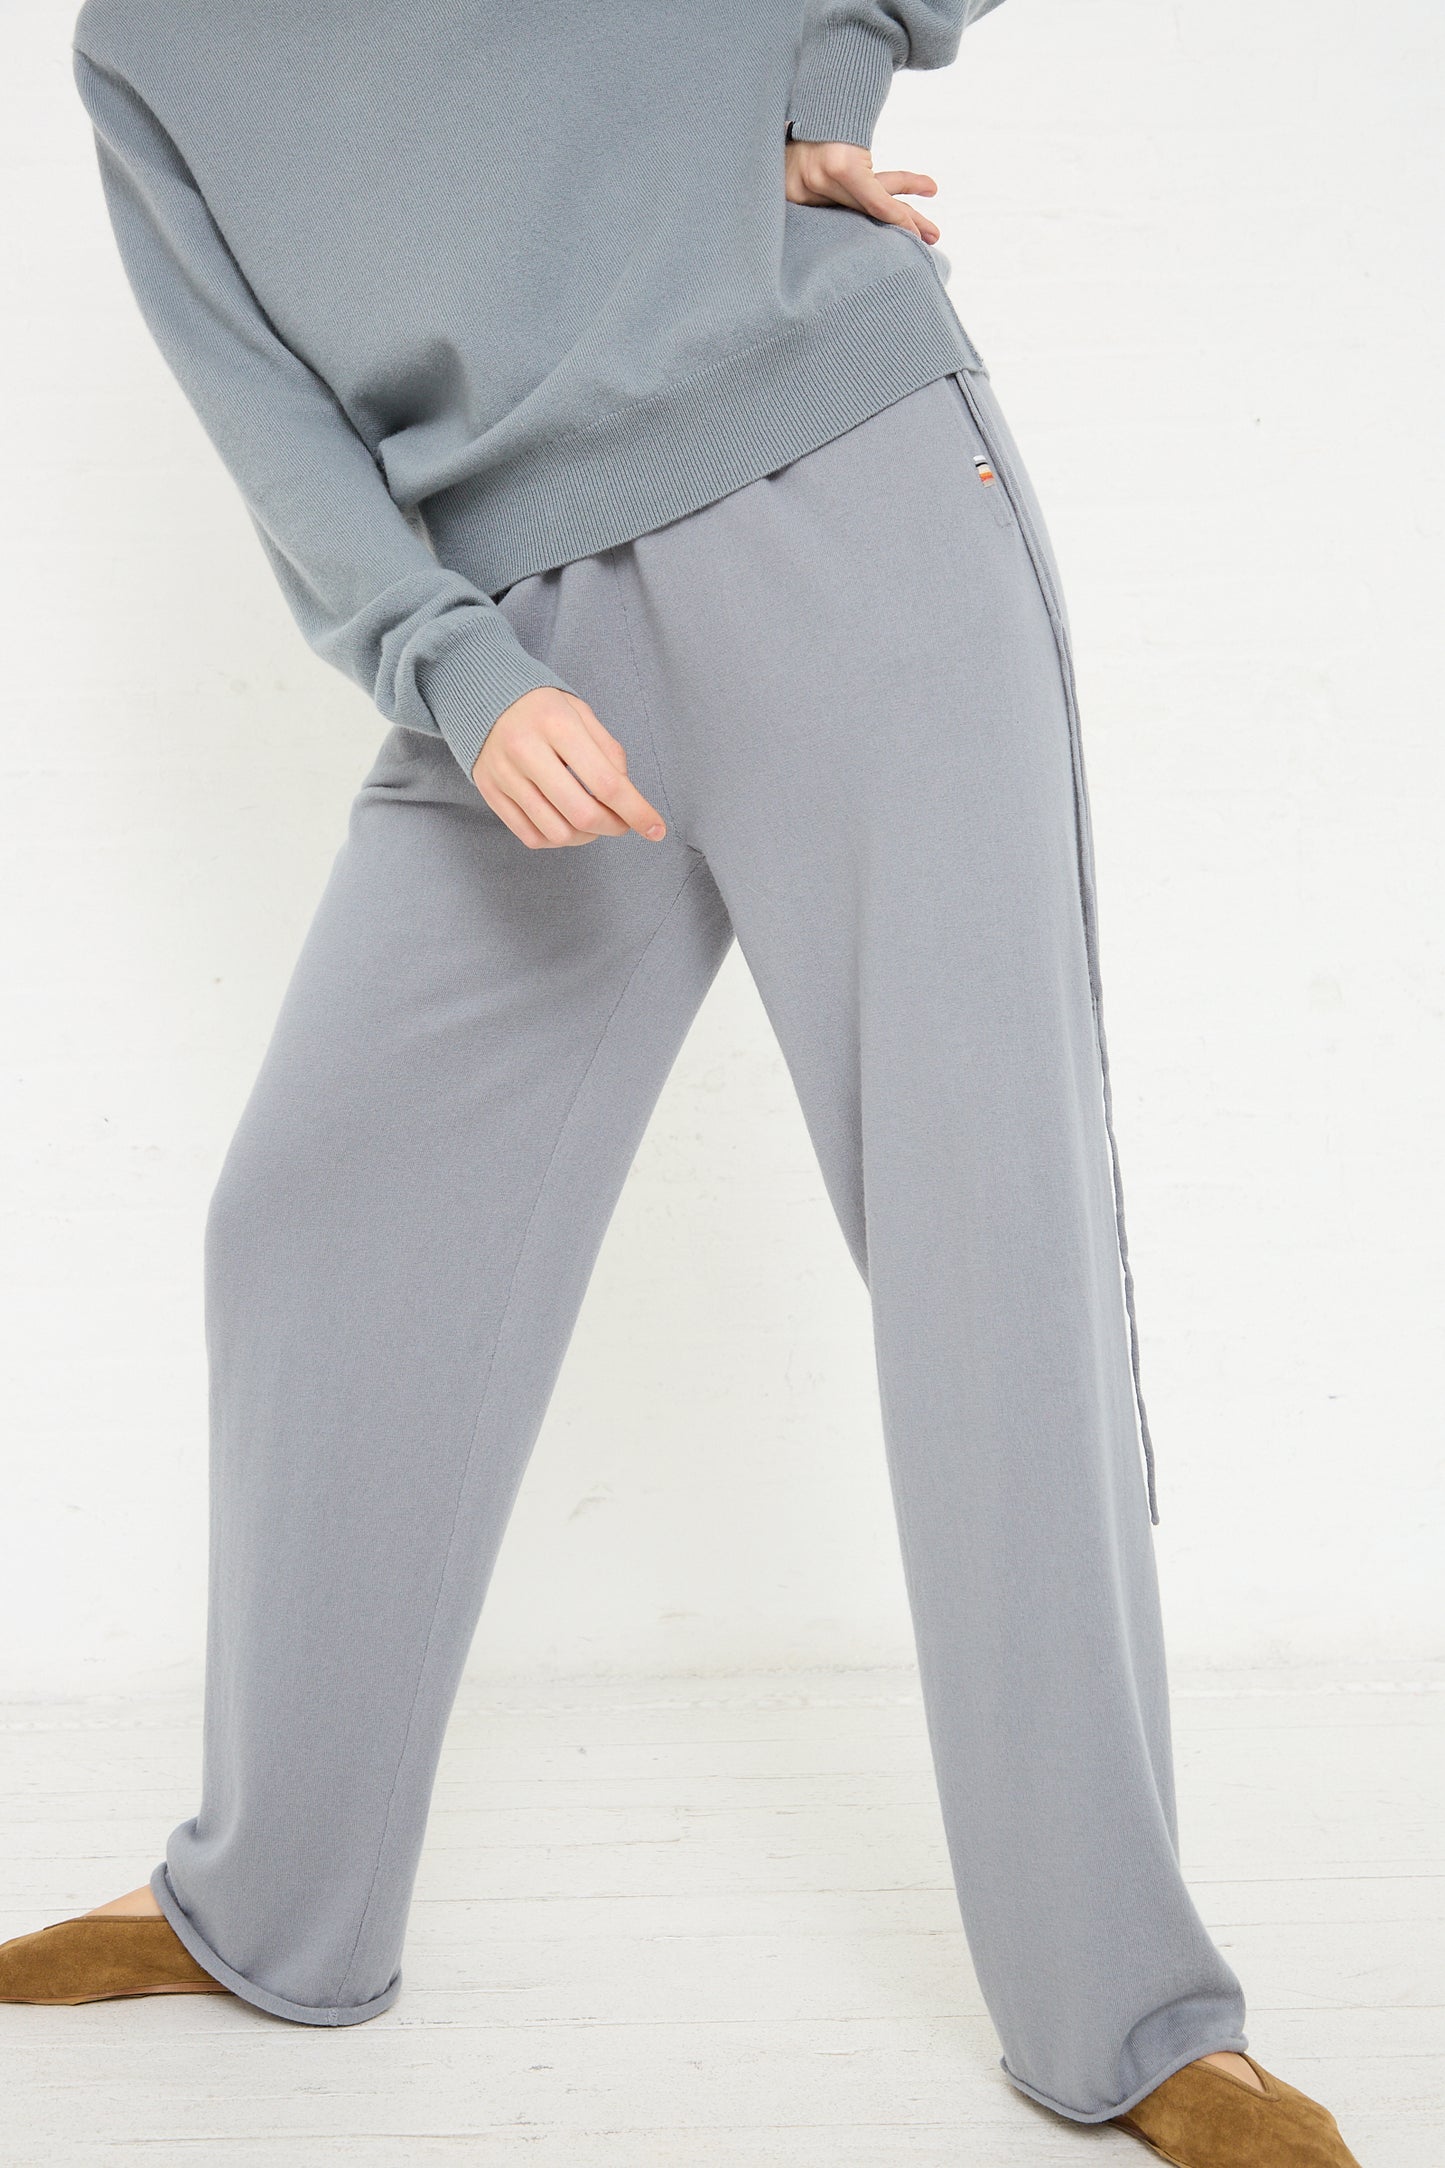 The model is wearing No. 278 Judo Pant in Sage with a drawstring waist and an Extreme Cashmere sweater.